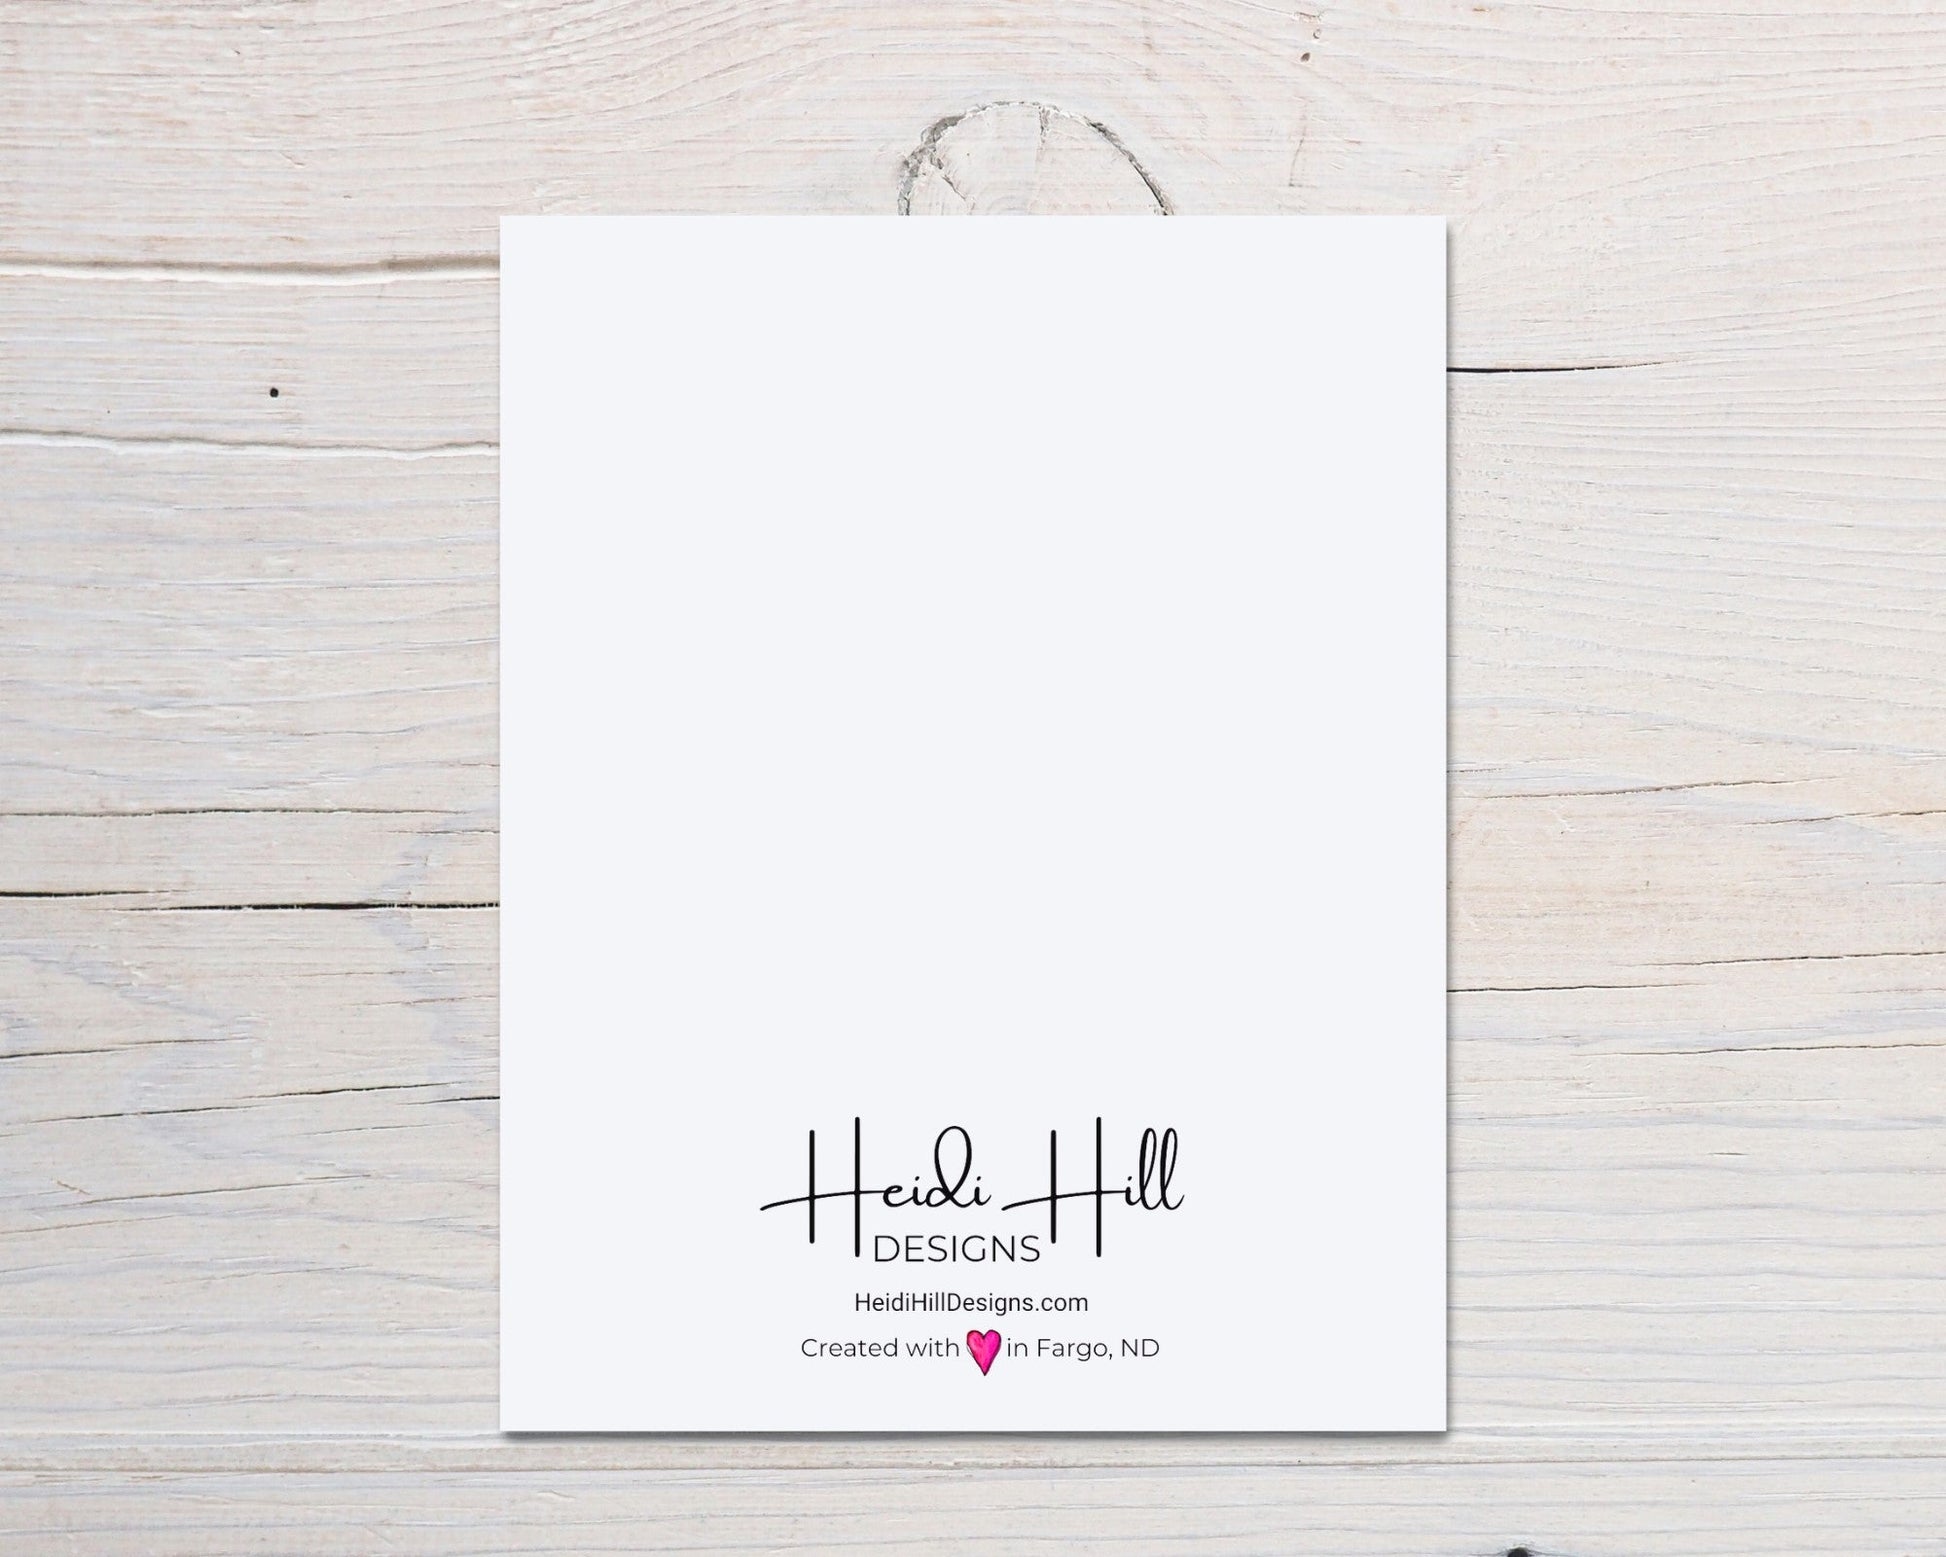 back of card with HeidiHillDesigns.com logo and the phrase "created with (hand-drawn heart) love in Fargo, ND"